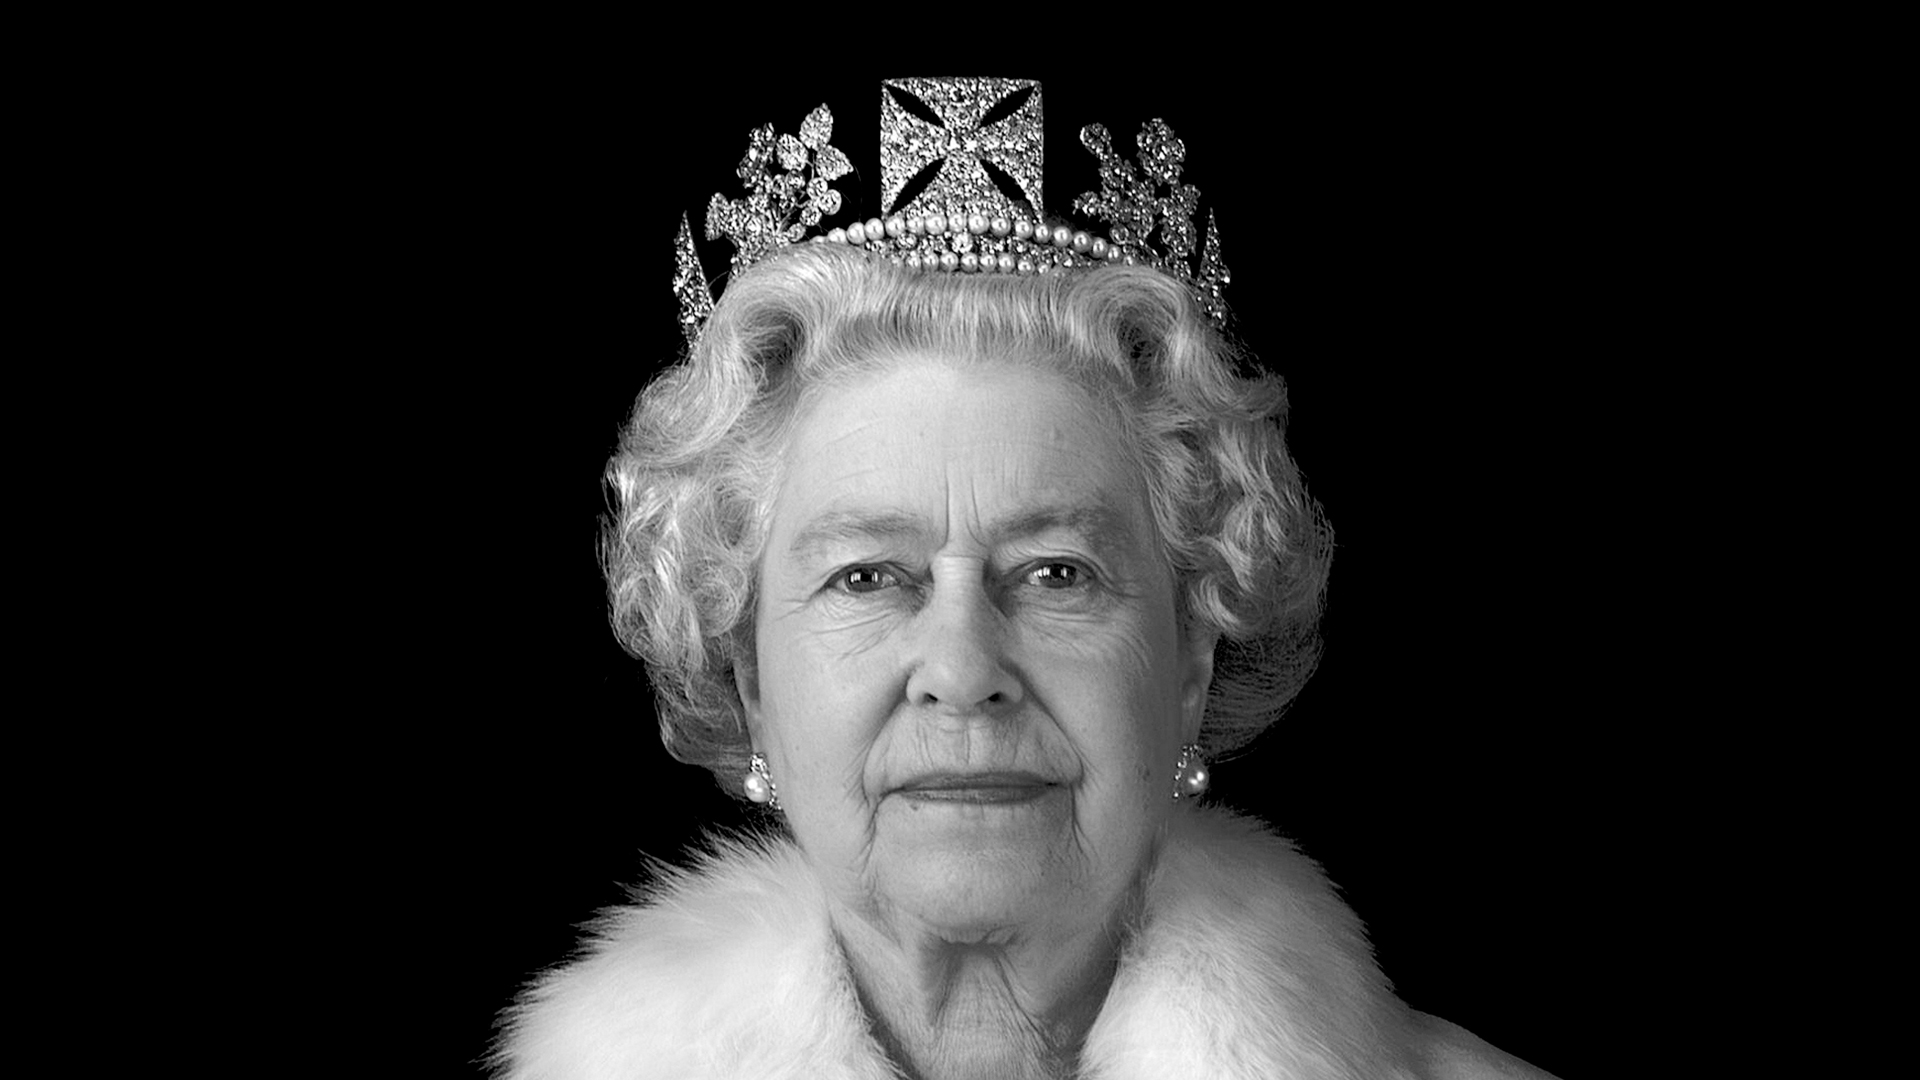 Media and Brand Responses to the Queen’s Passing